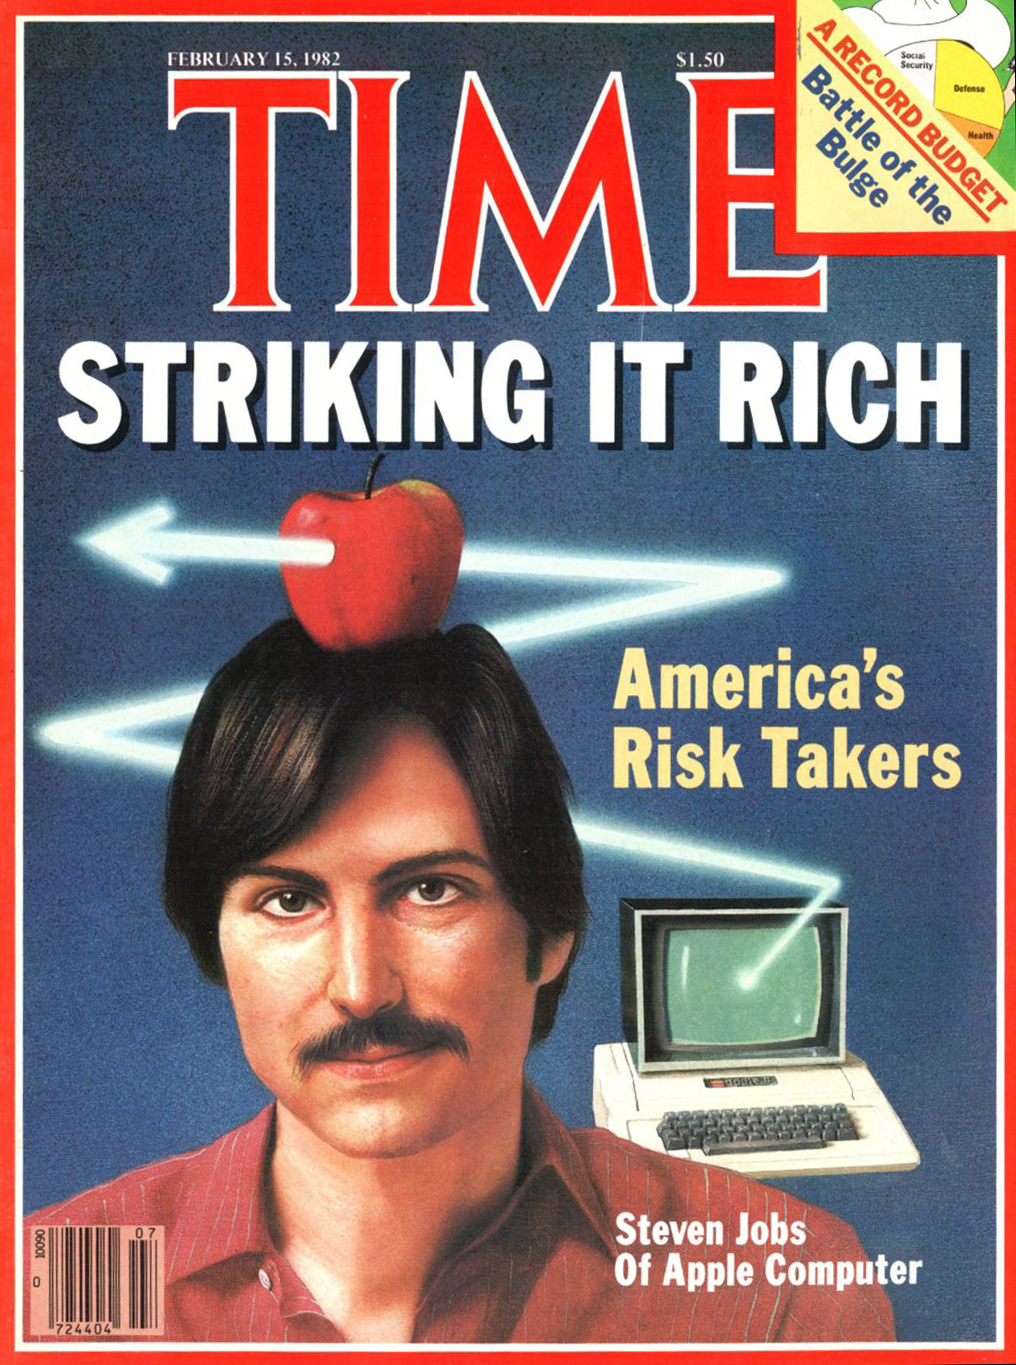 The Feb. 15, 1982 cover of TIME